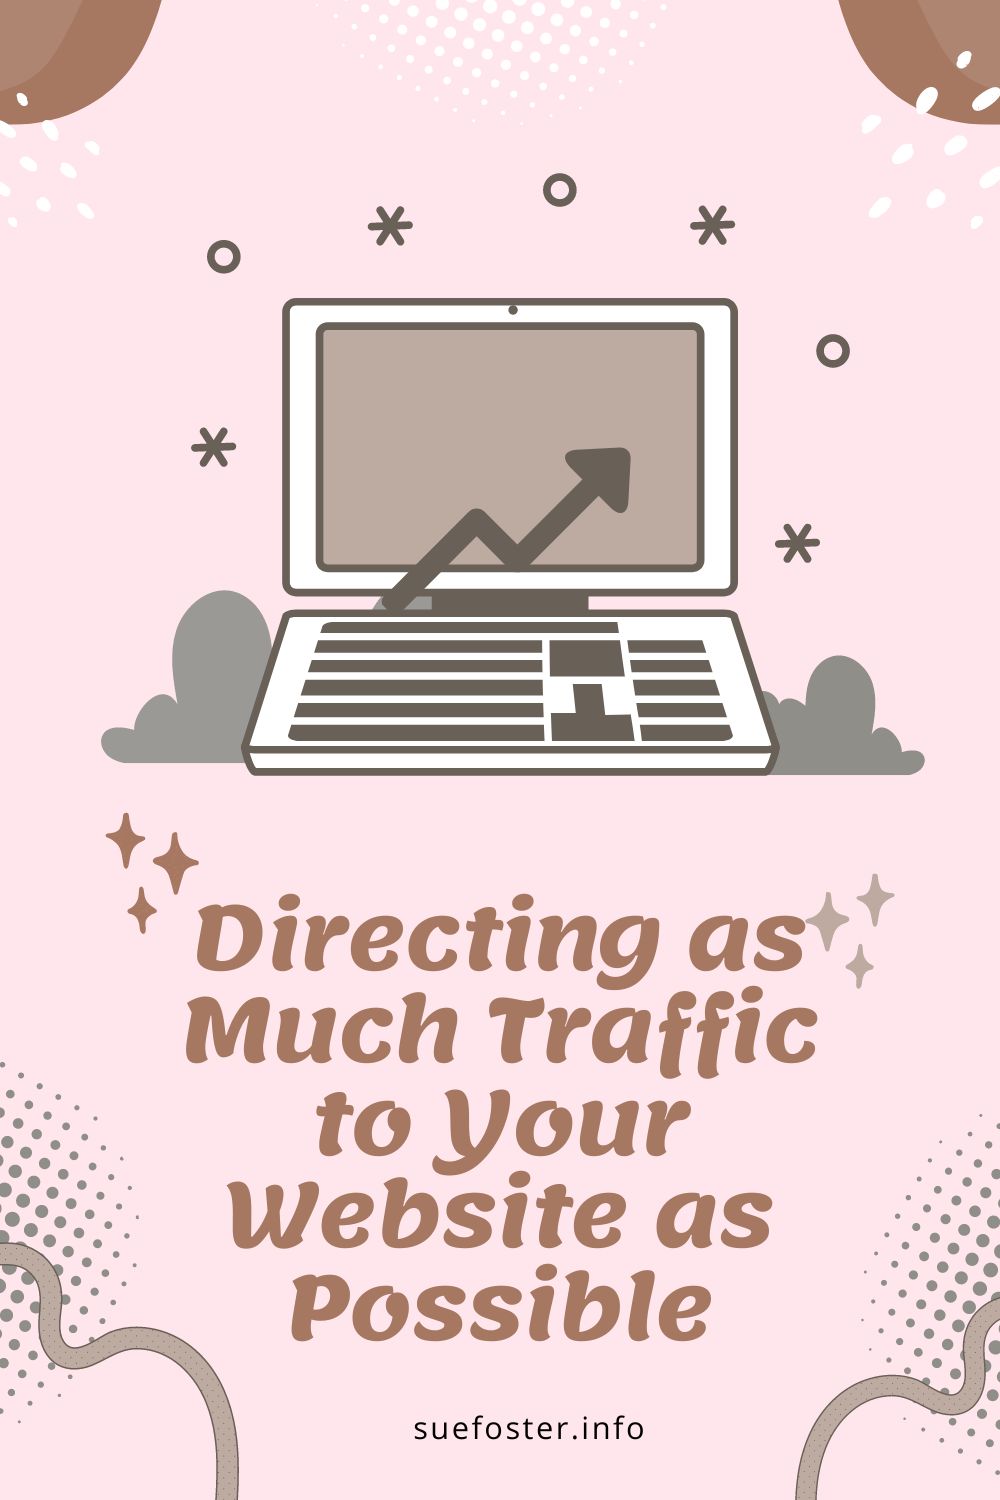 Learn effective ways to boost website traffic for your small business. Explore SEO, mobile accessibility, social media, collaborations, email marketing, and optimization strategies.